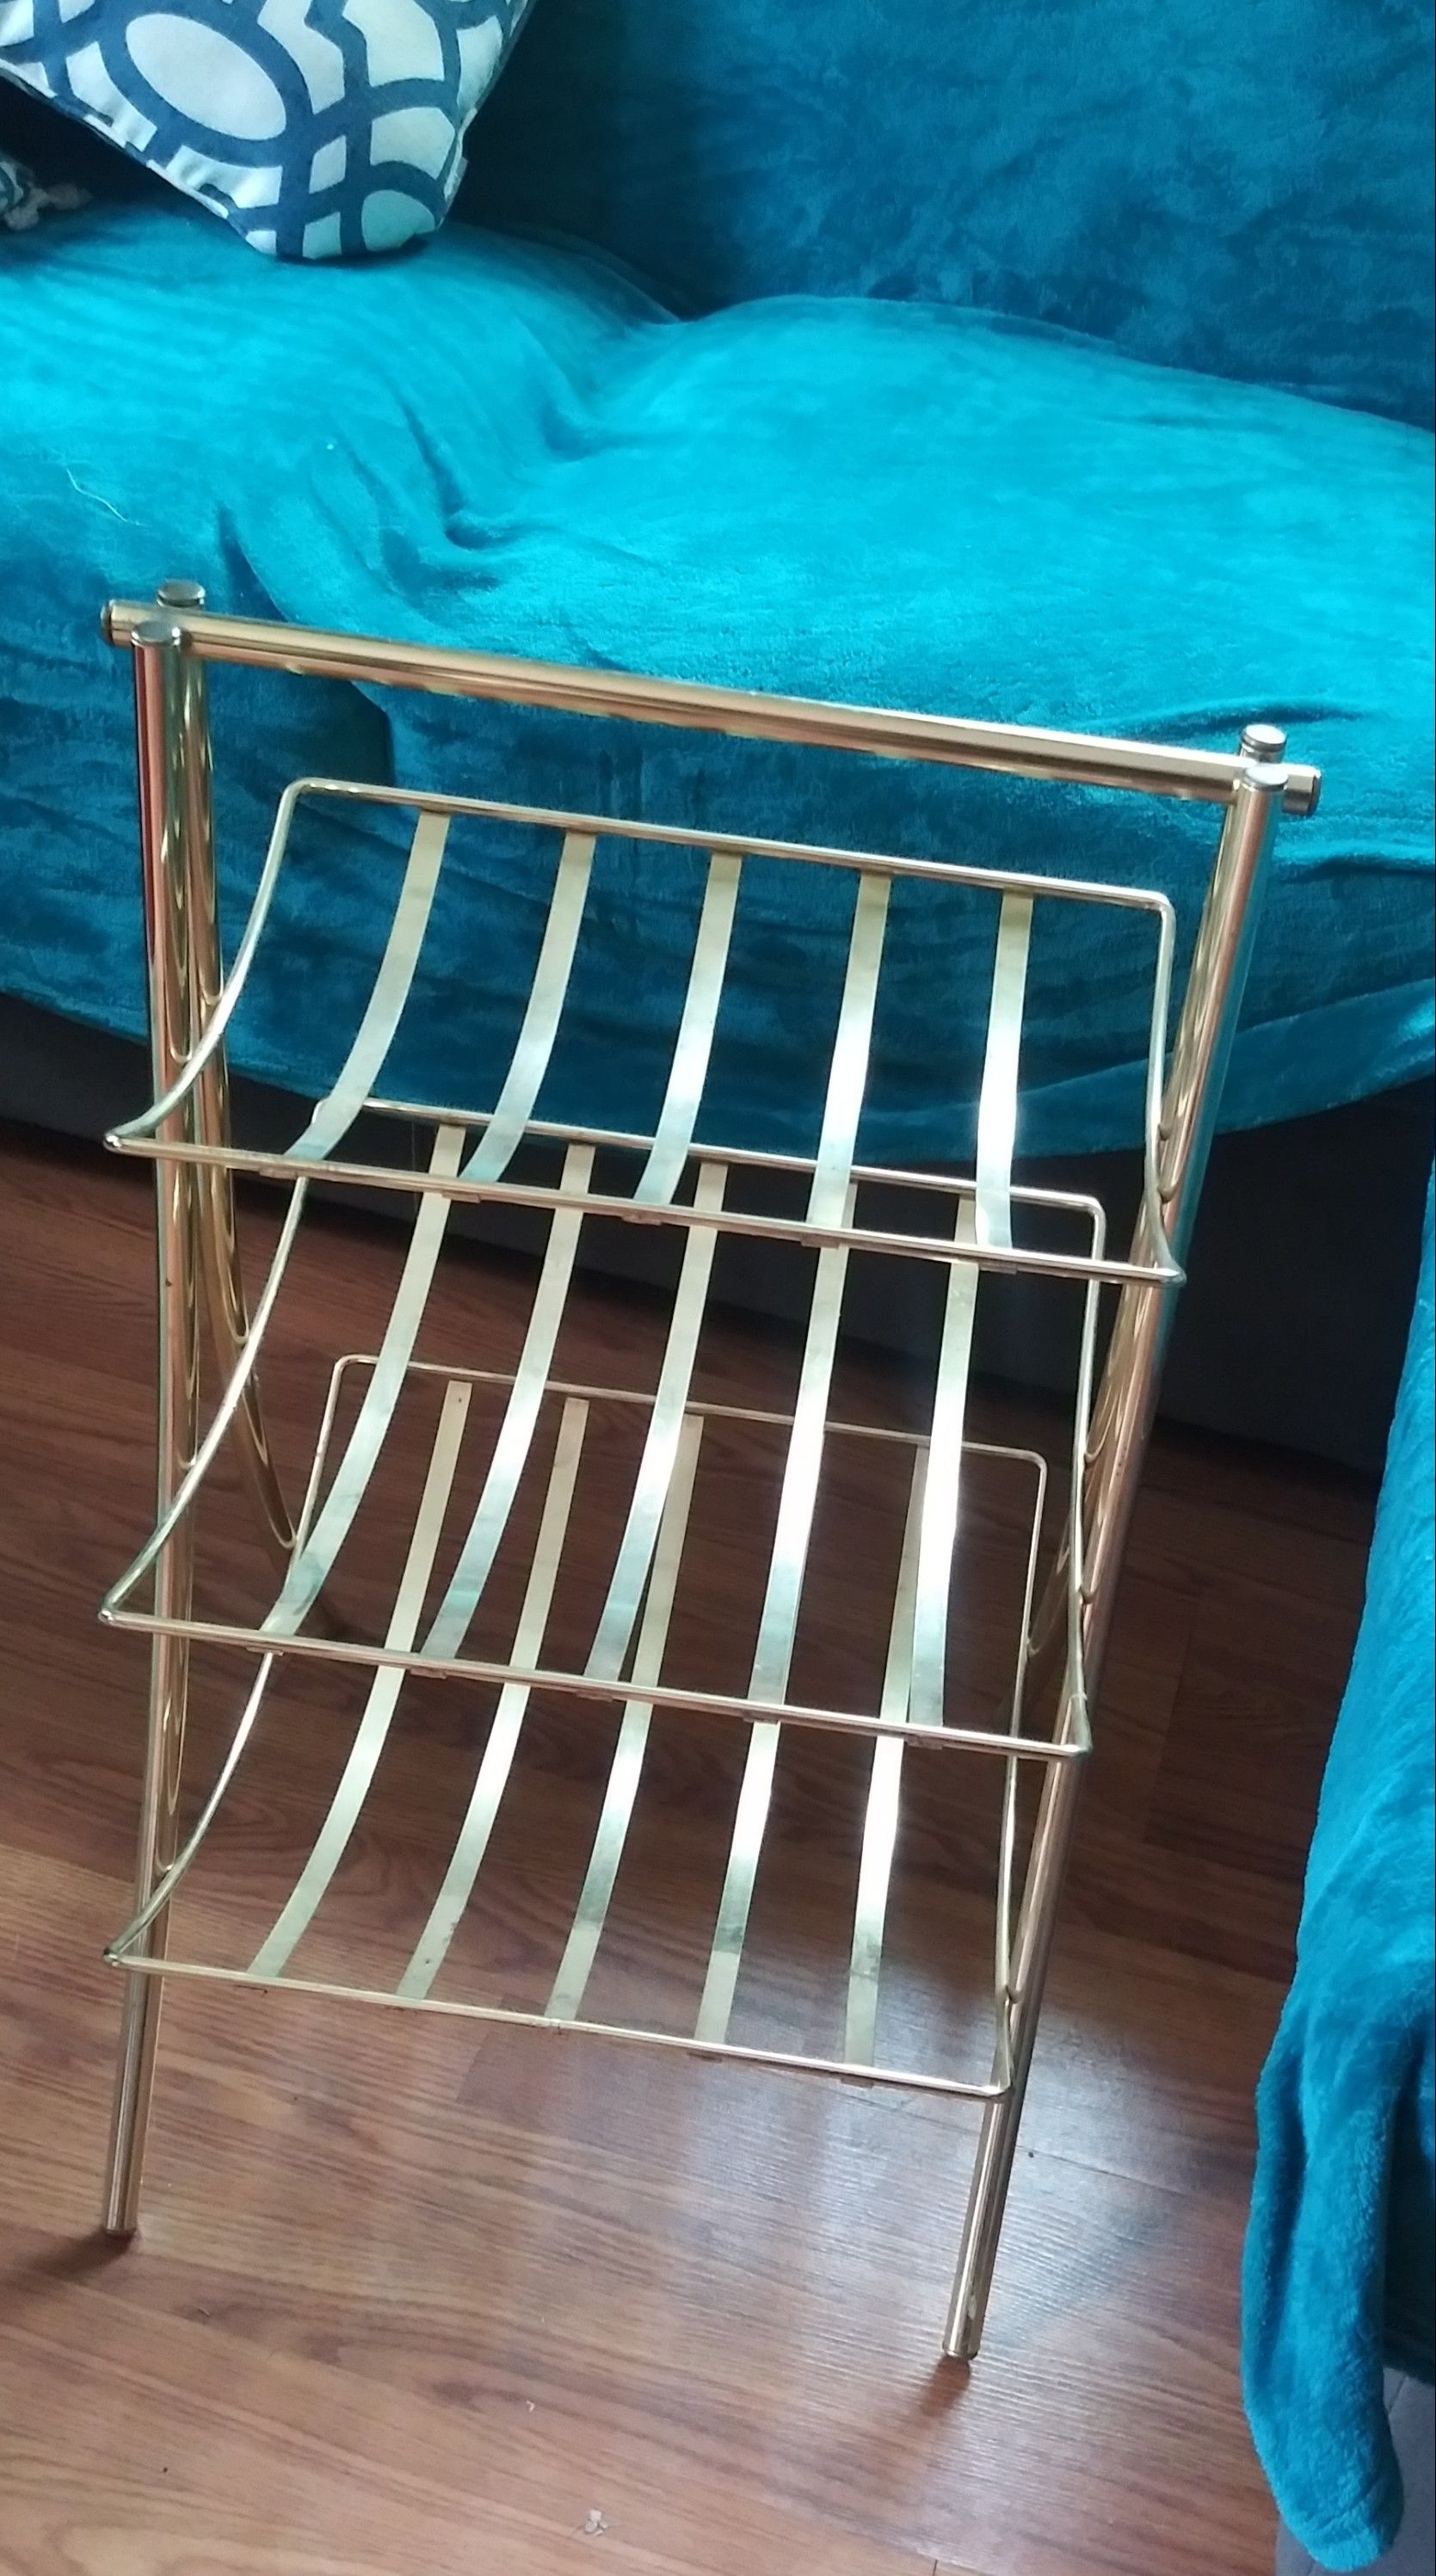 Adorable Gold little rack for magazines